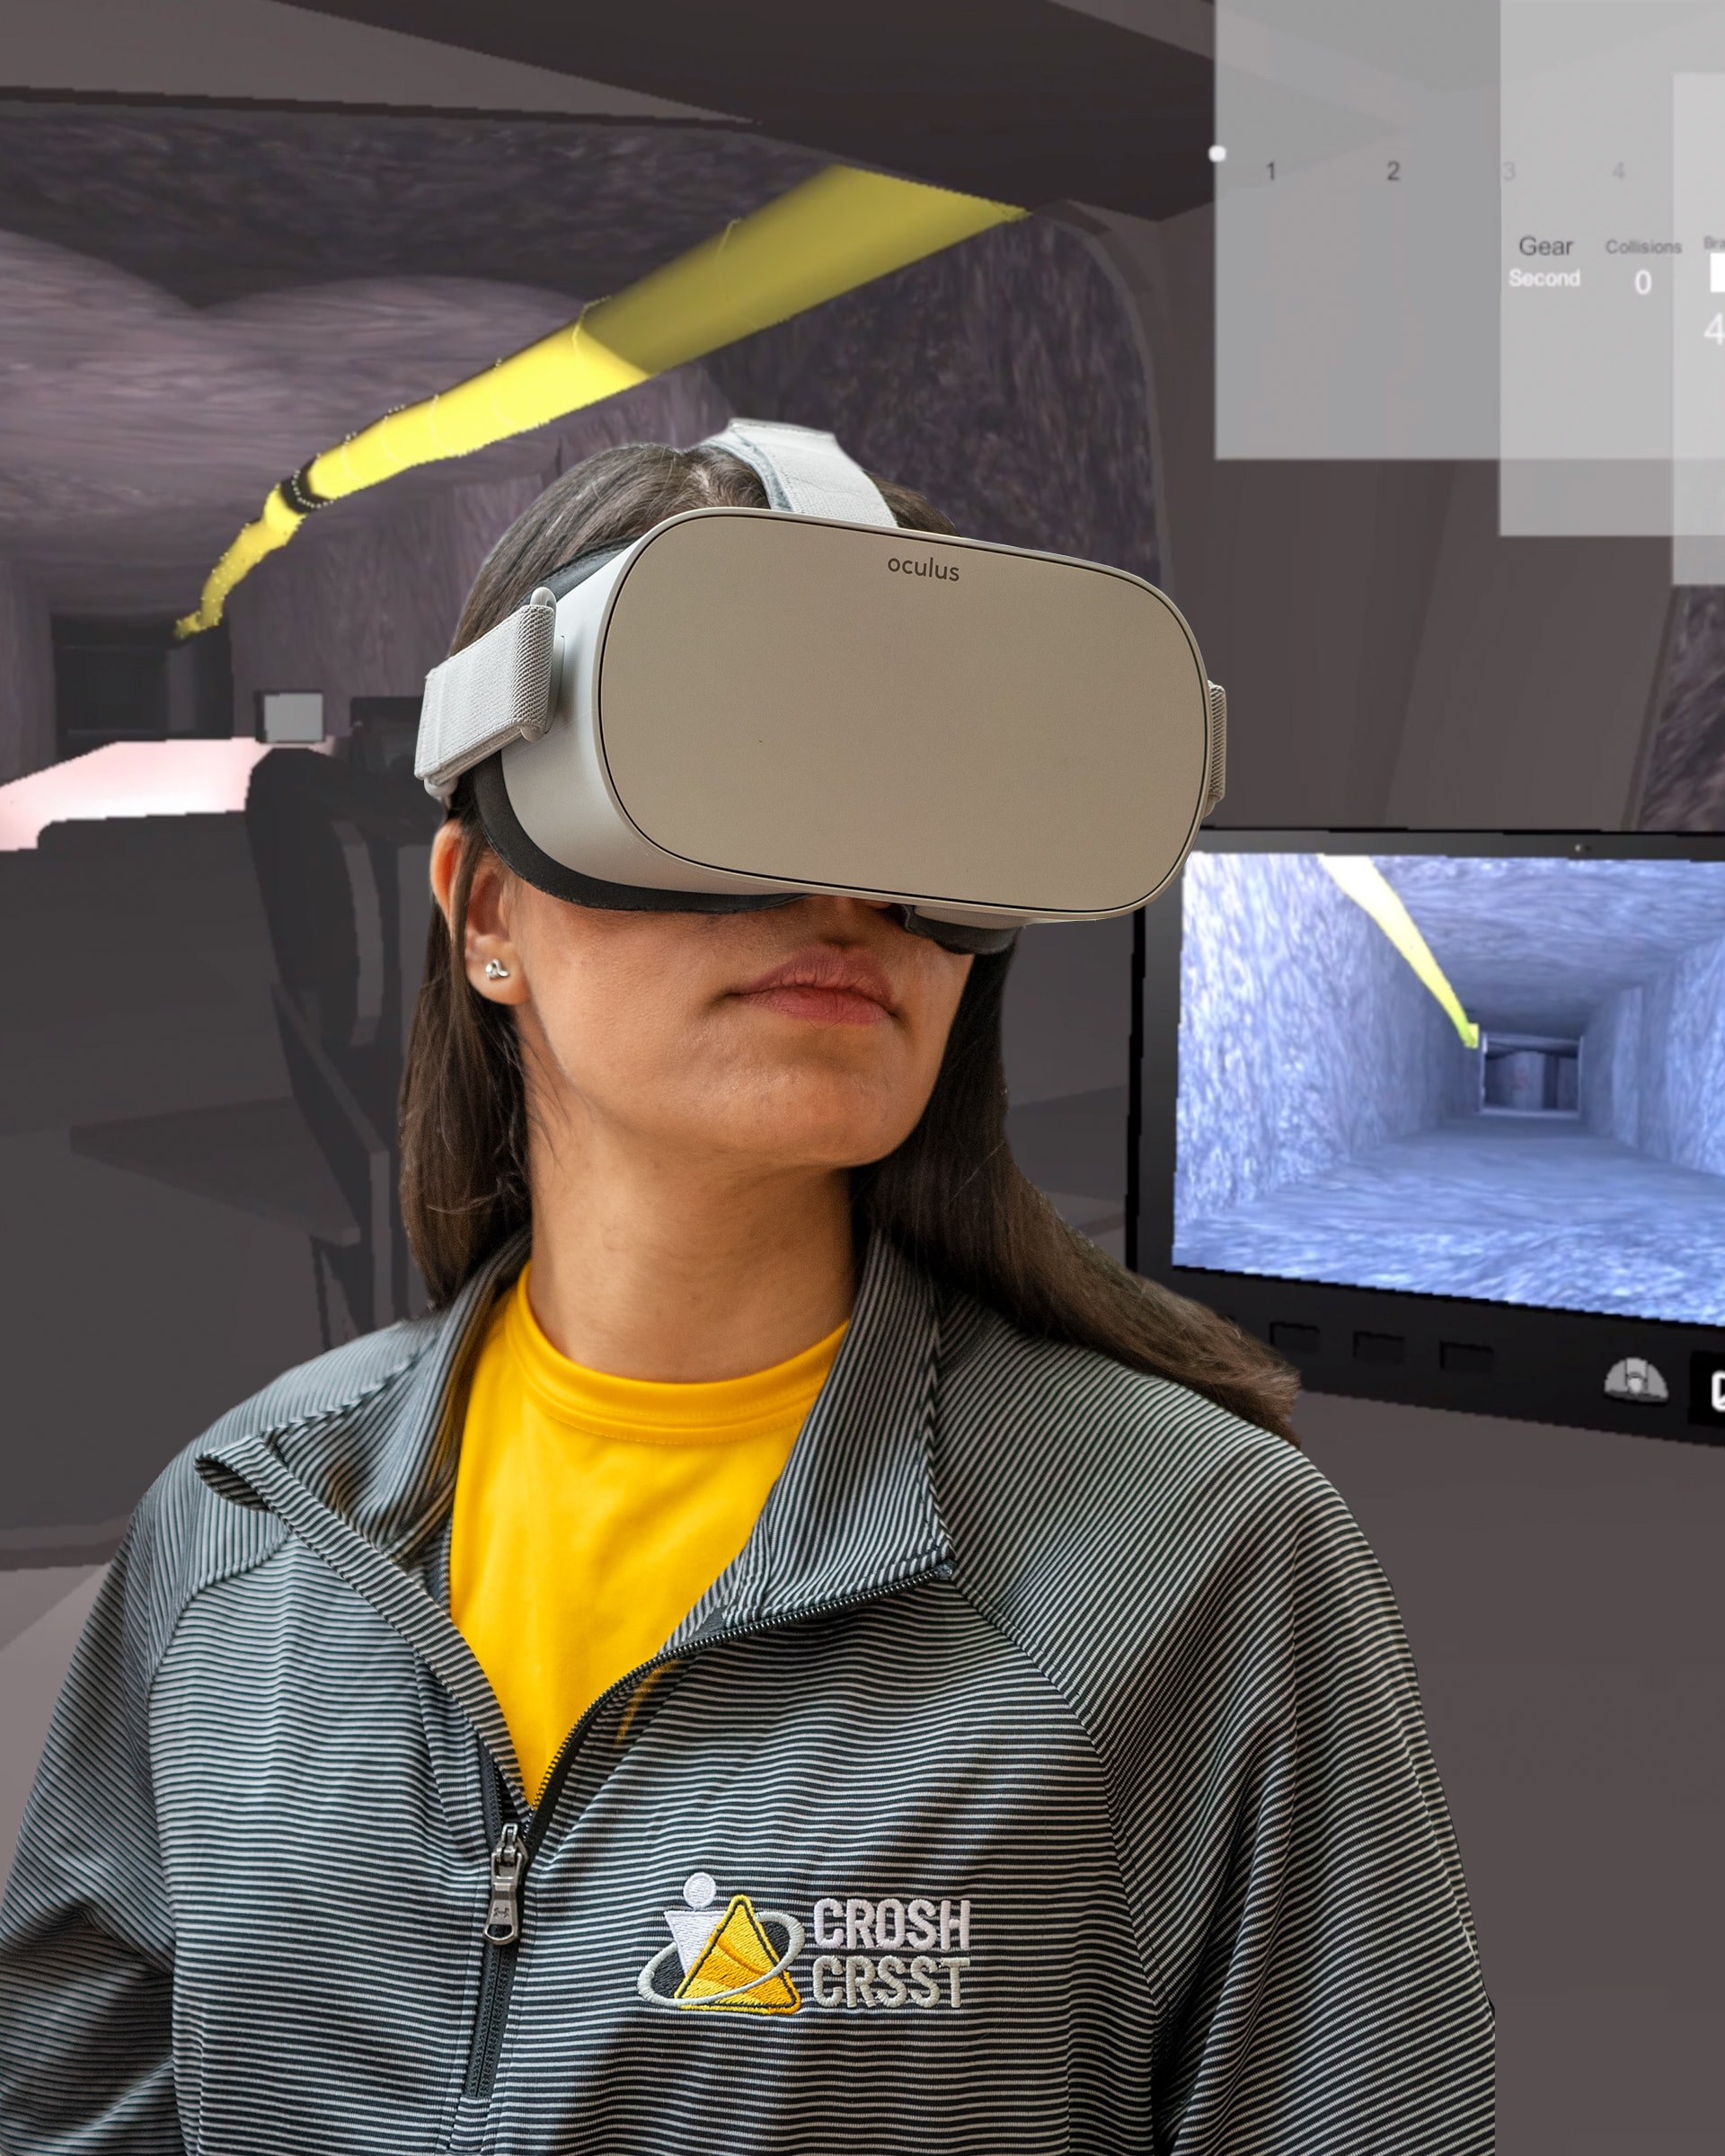 Person wearing a VR headset with the virtual environment as the background